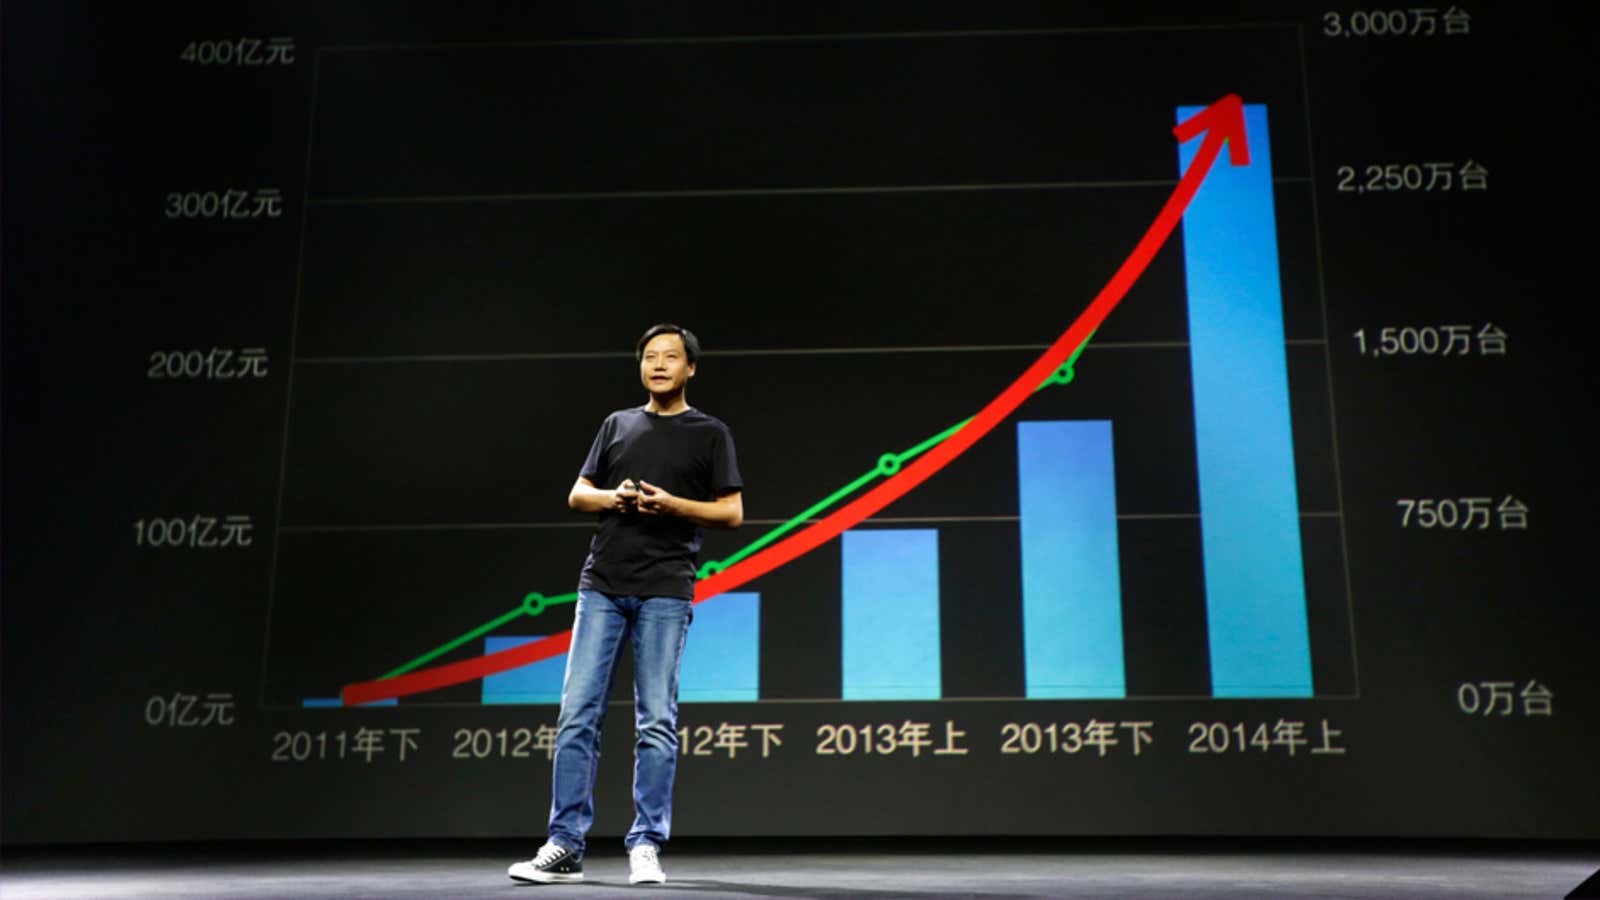 Things continue to look up for Xiaomi and CEO Lei Jun.